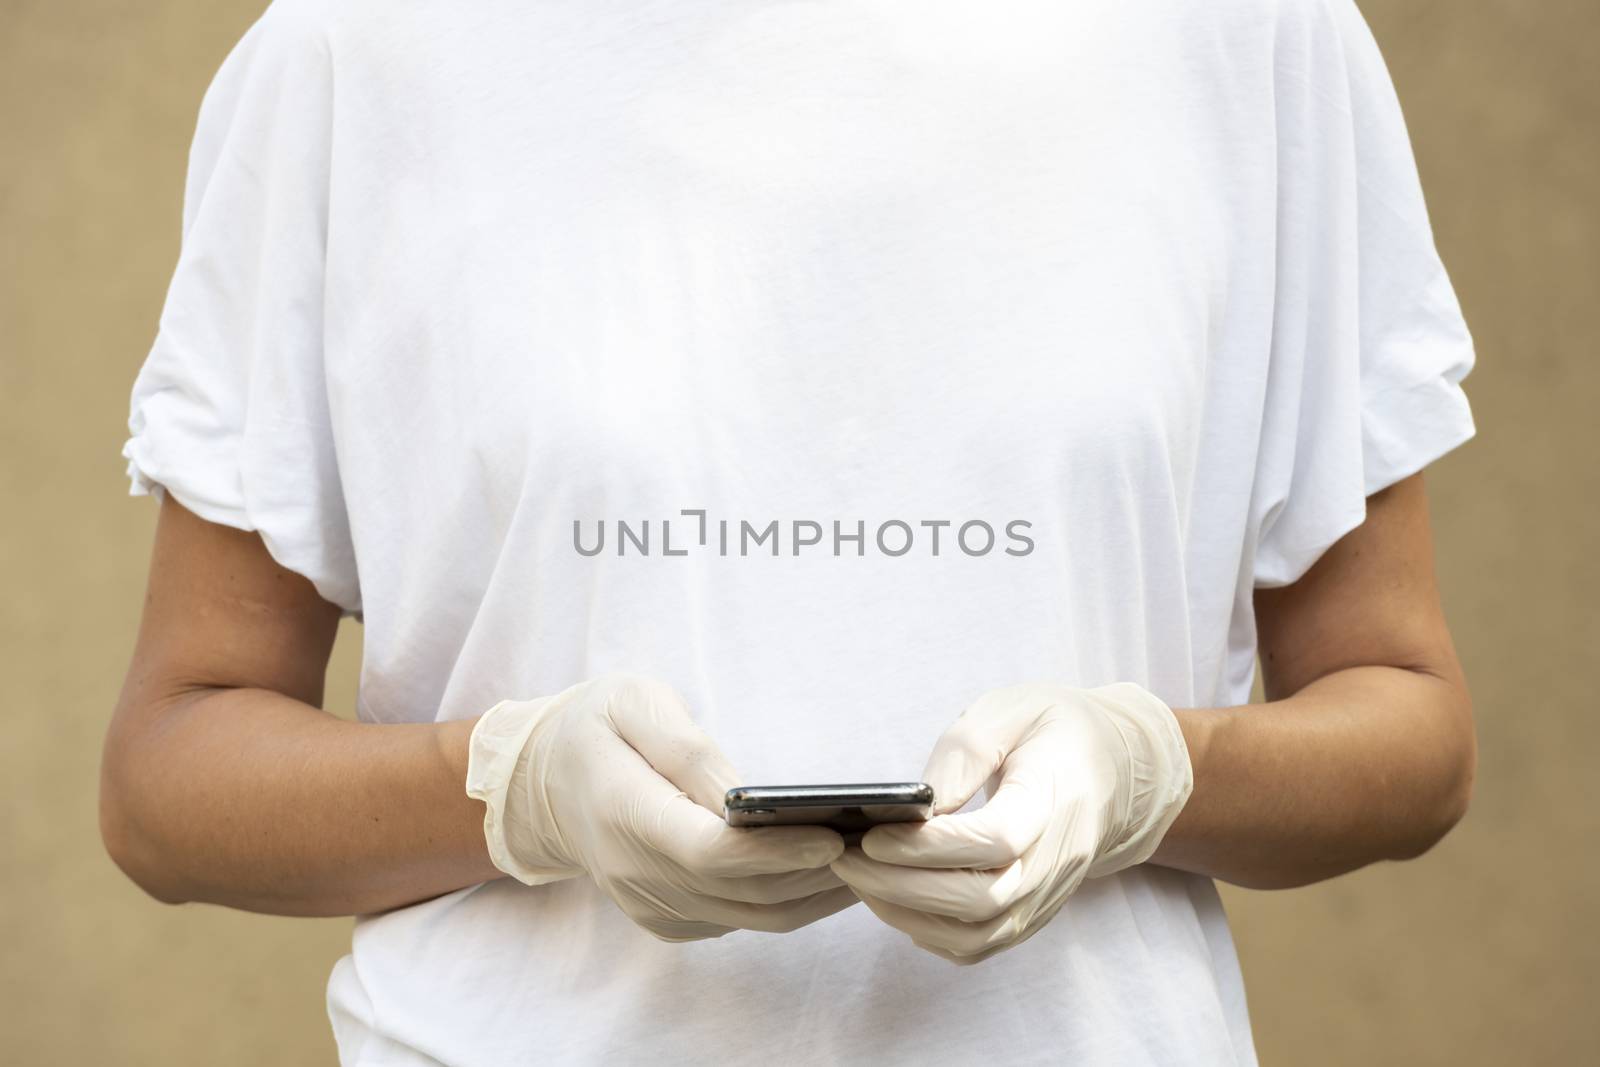 Woman wearing protective gloves and texting or chatting with her Smartphone. Close-up on hands, natural lighting and copy space on womans' t-shirt